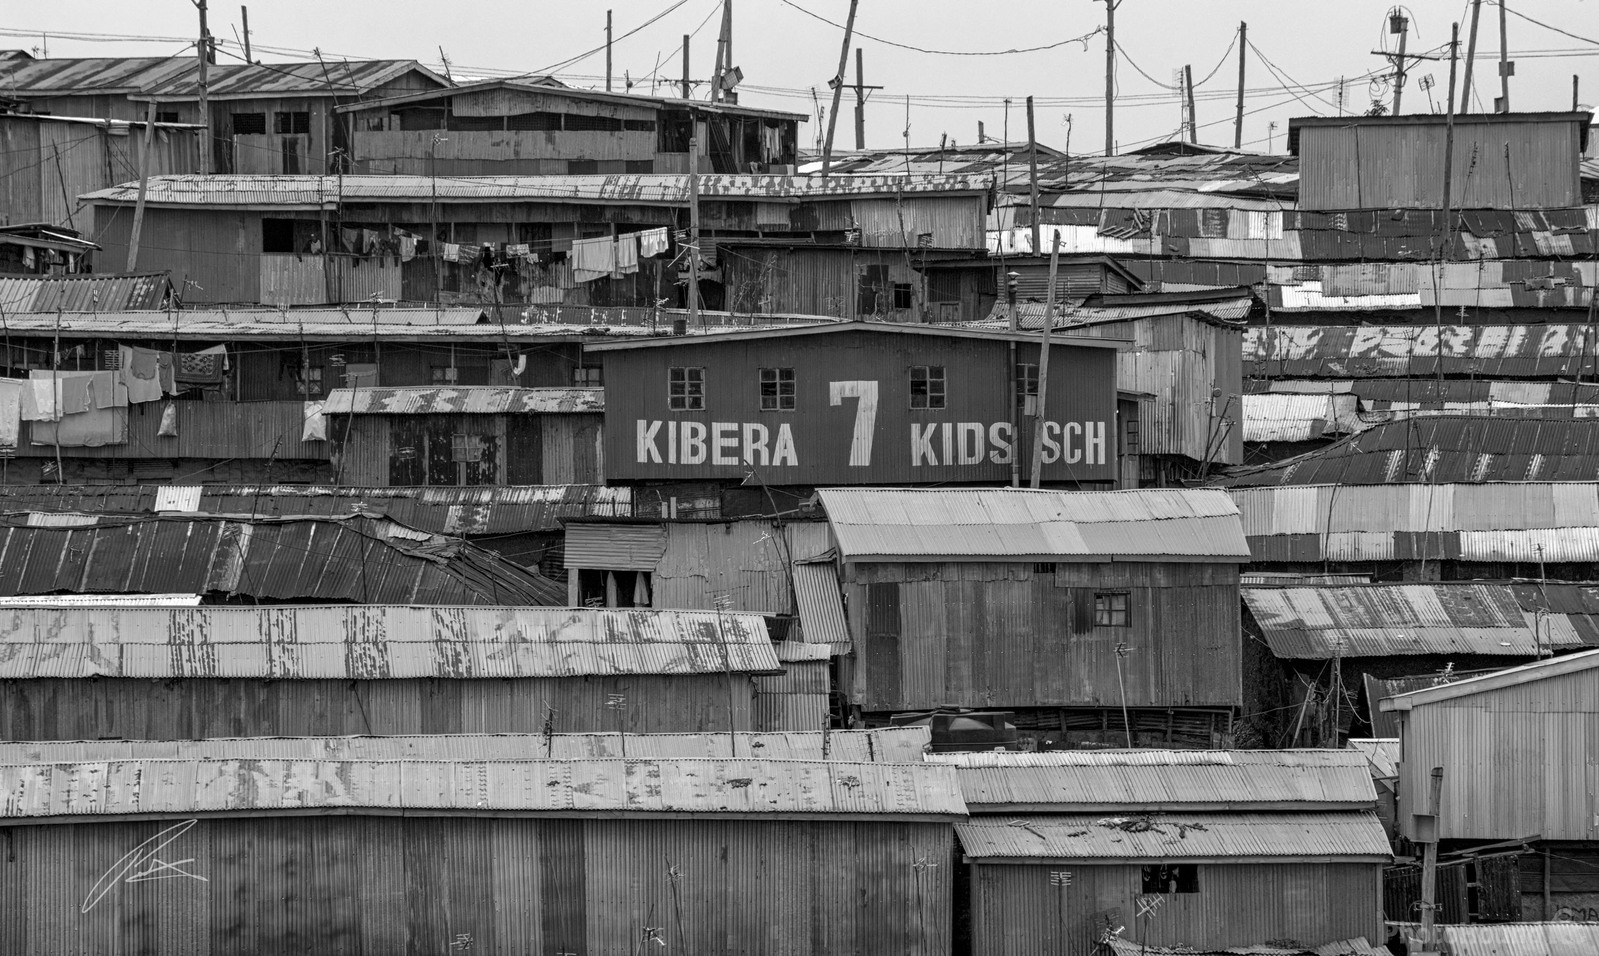 Image of Kibera - the largest urban slum of Africa by Patrick Hulley